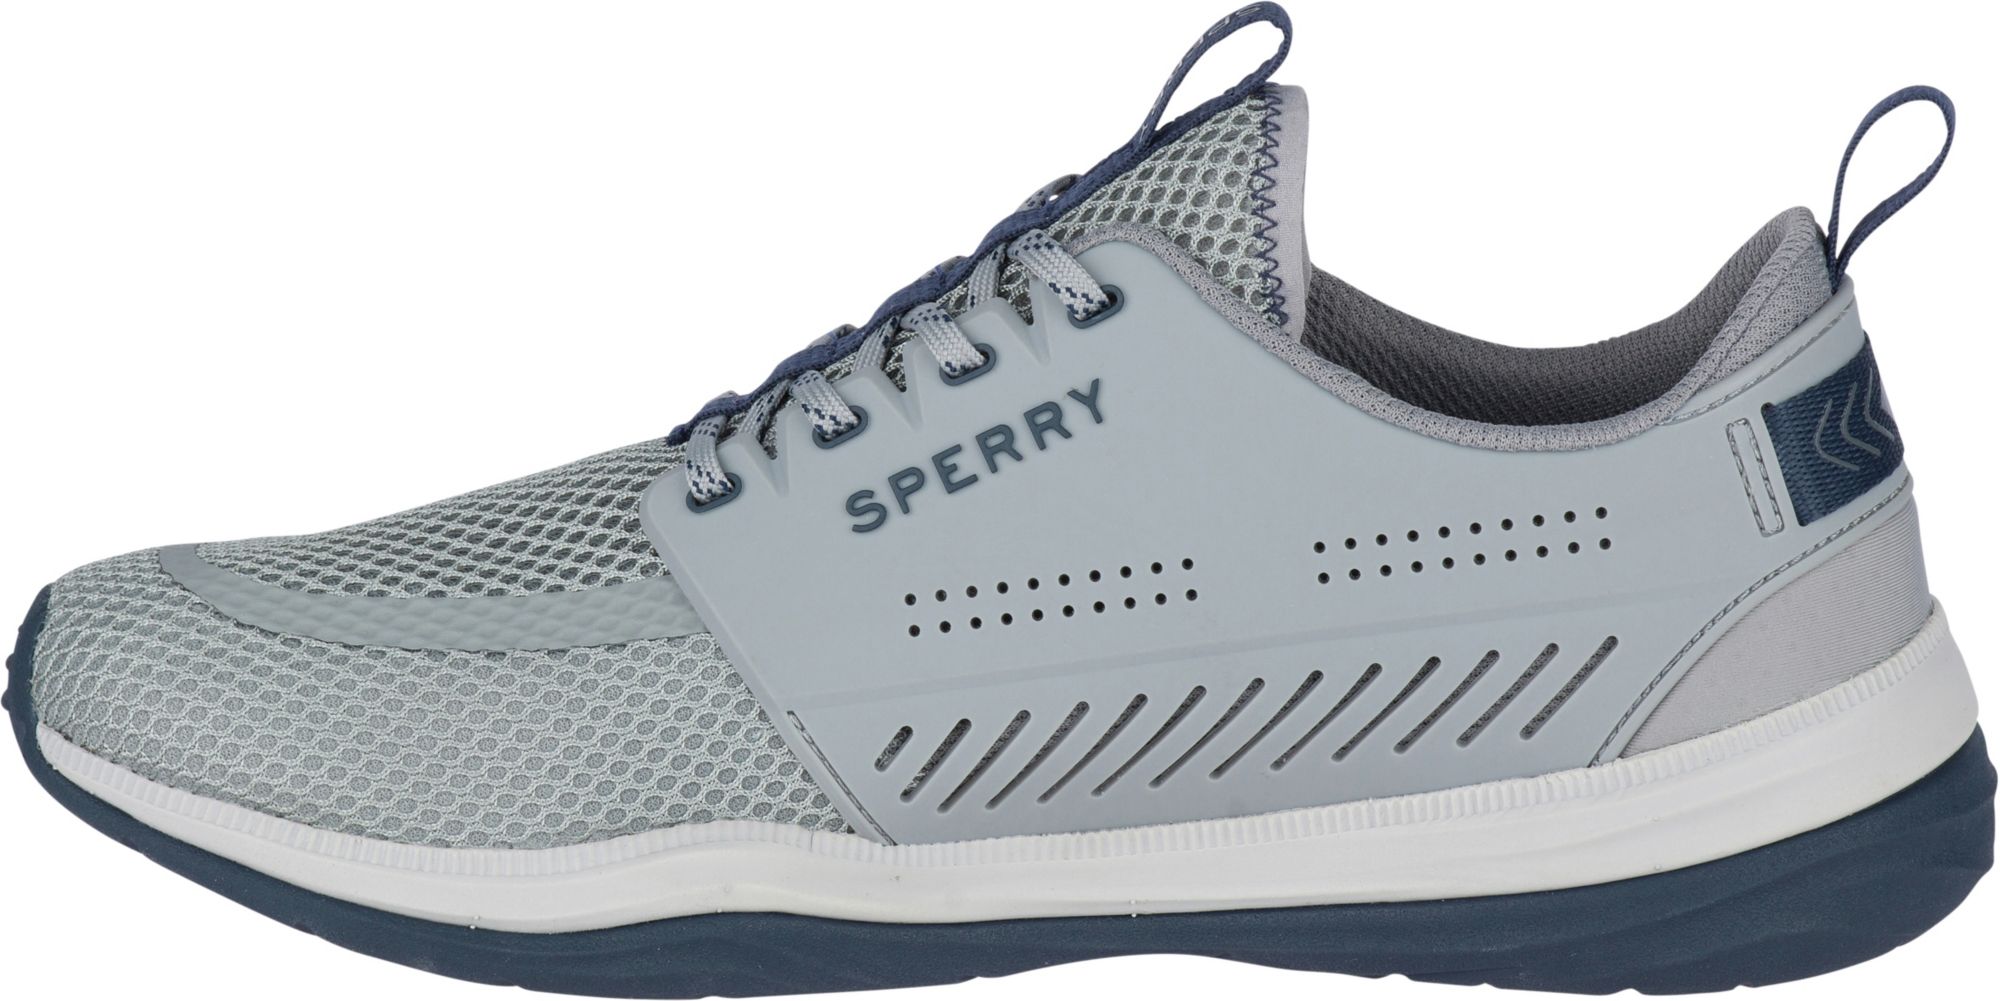 sperry running shoes